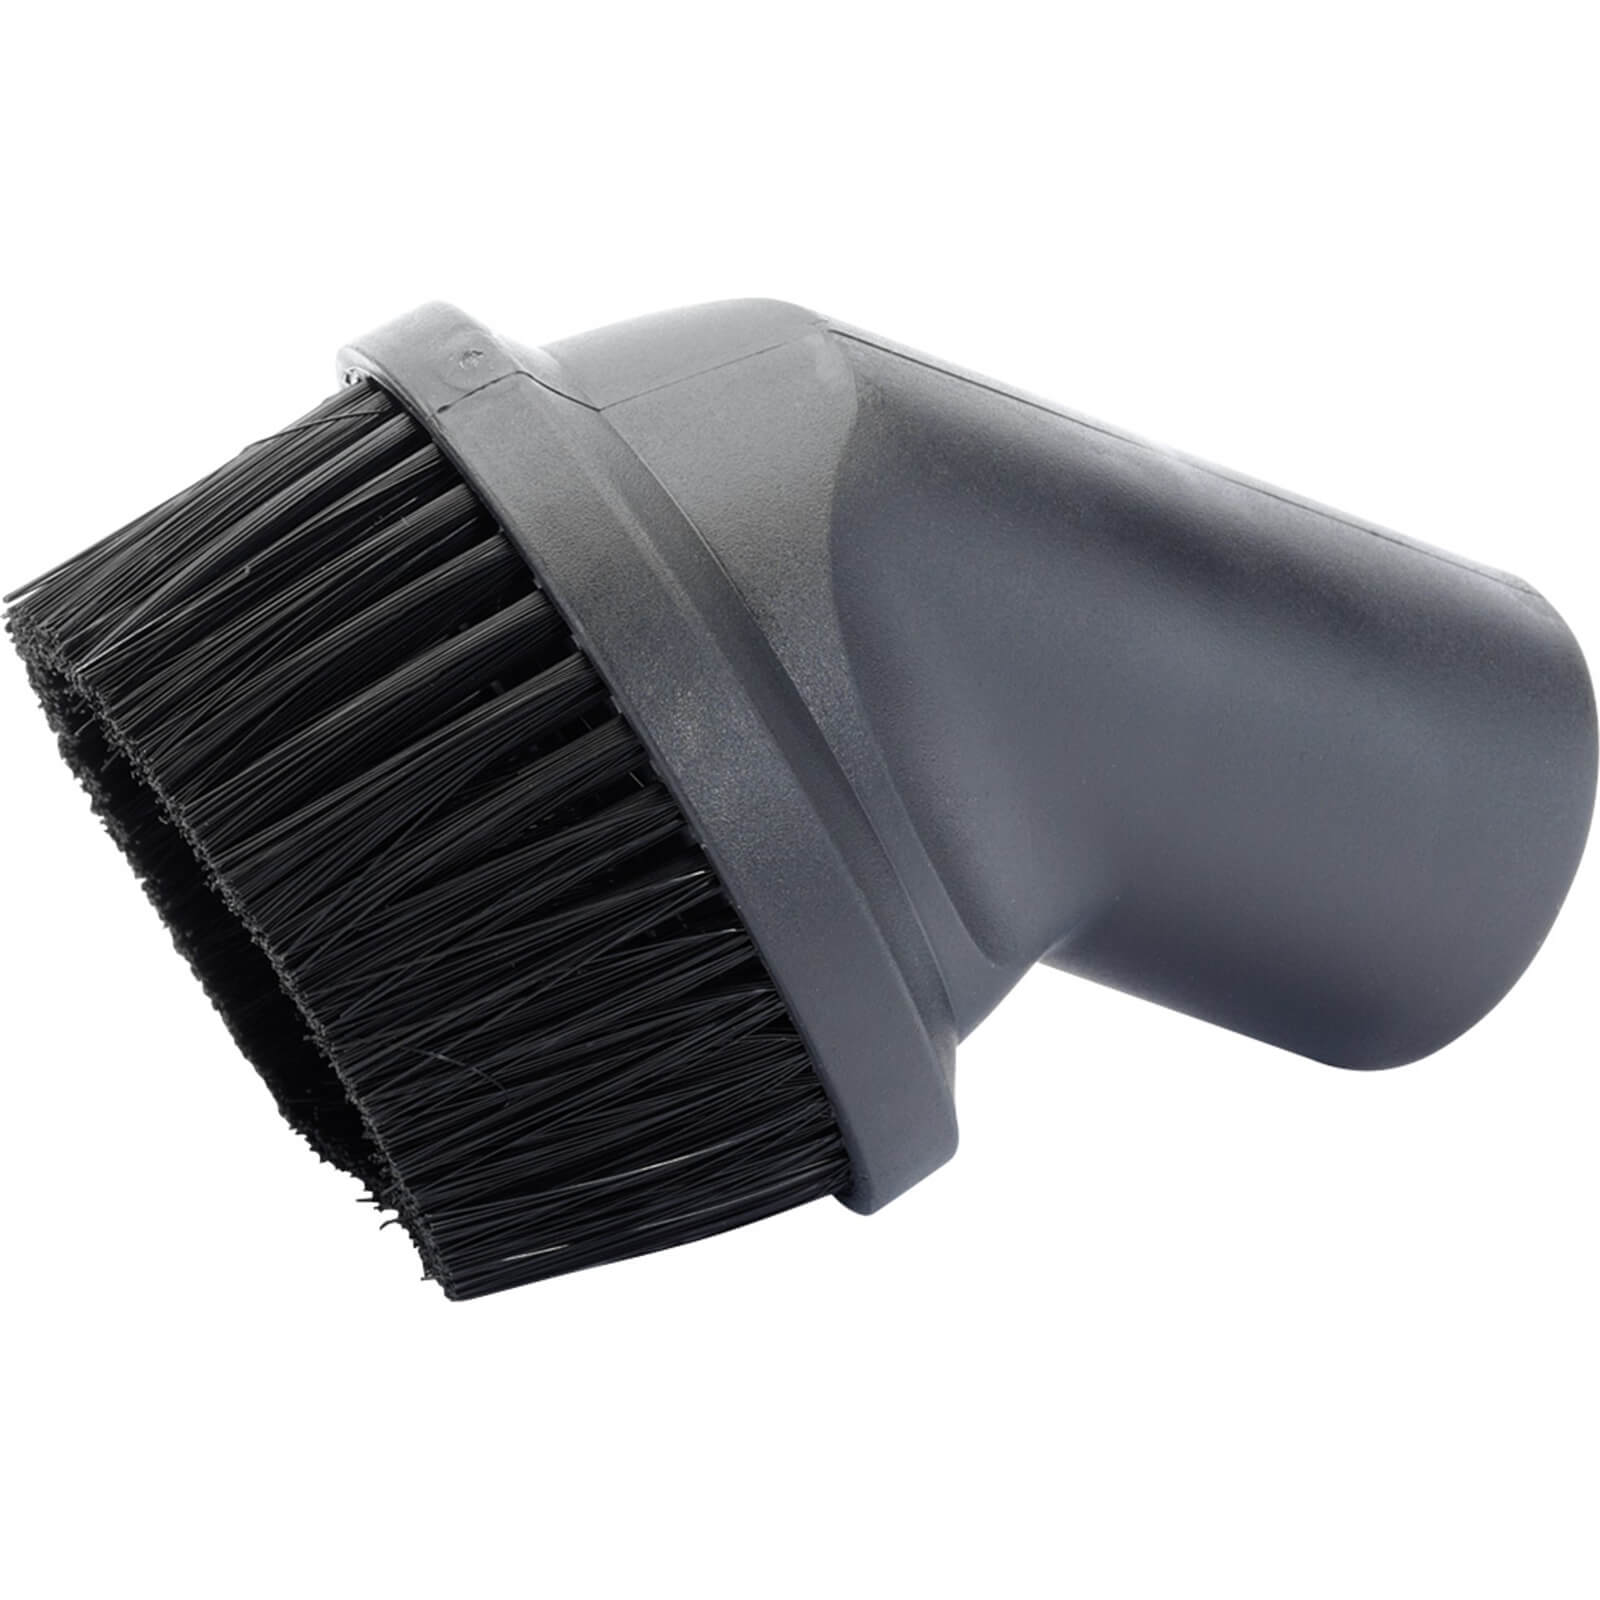 Photos - Other household chemicals Draper Brush Nozzle for 08101, 48497, 48498 and 48499 Vacuum Cleaners AVC5 